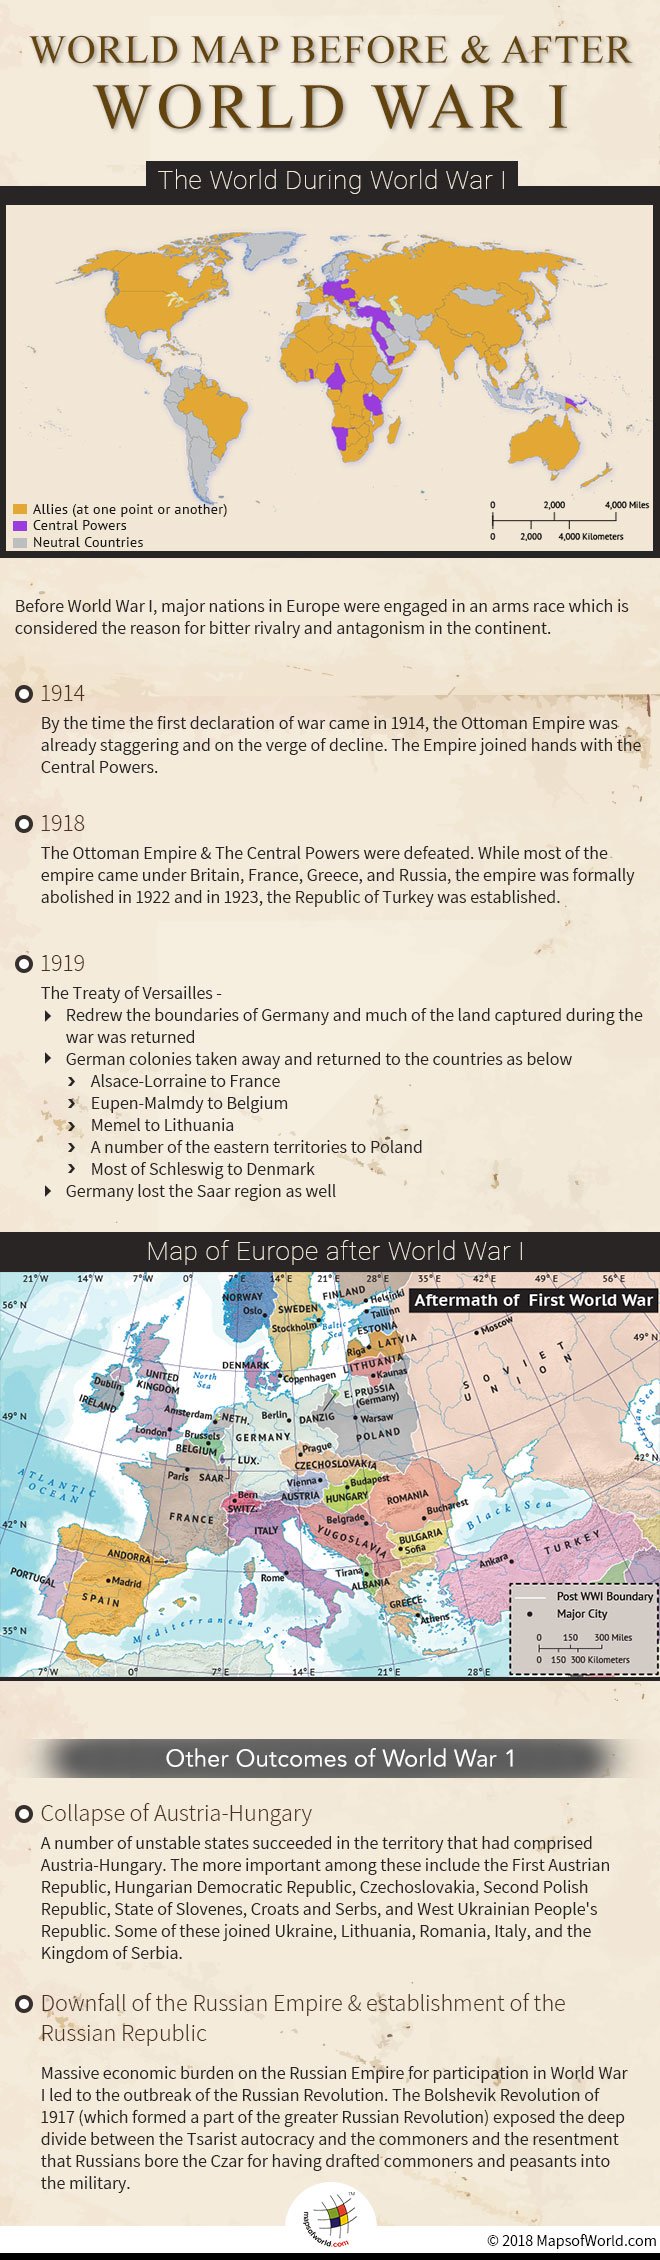 Infographic elaborating maps before and after World War 1